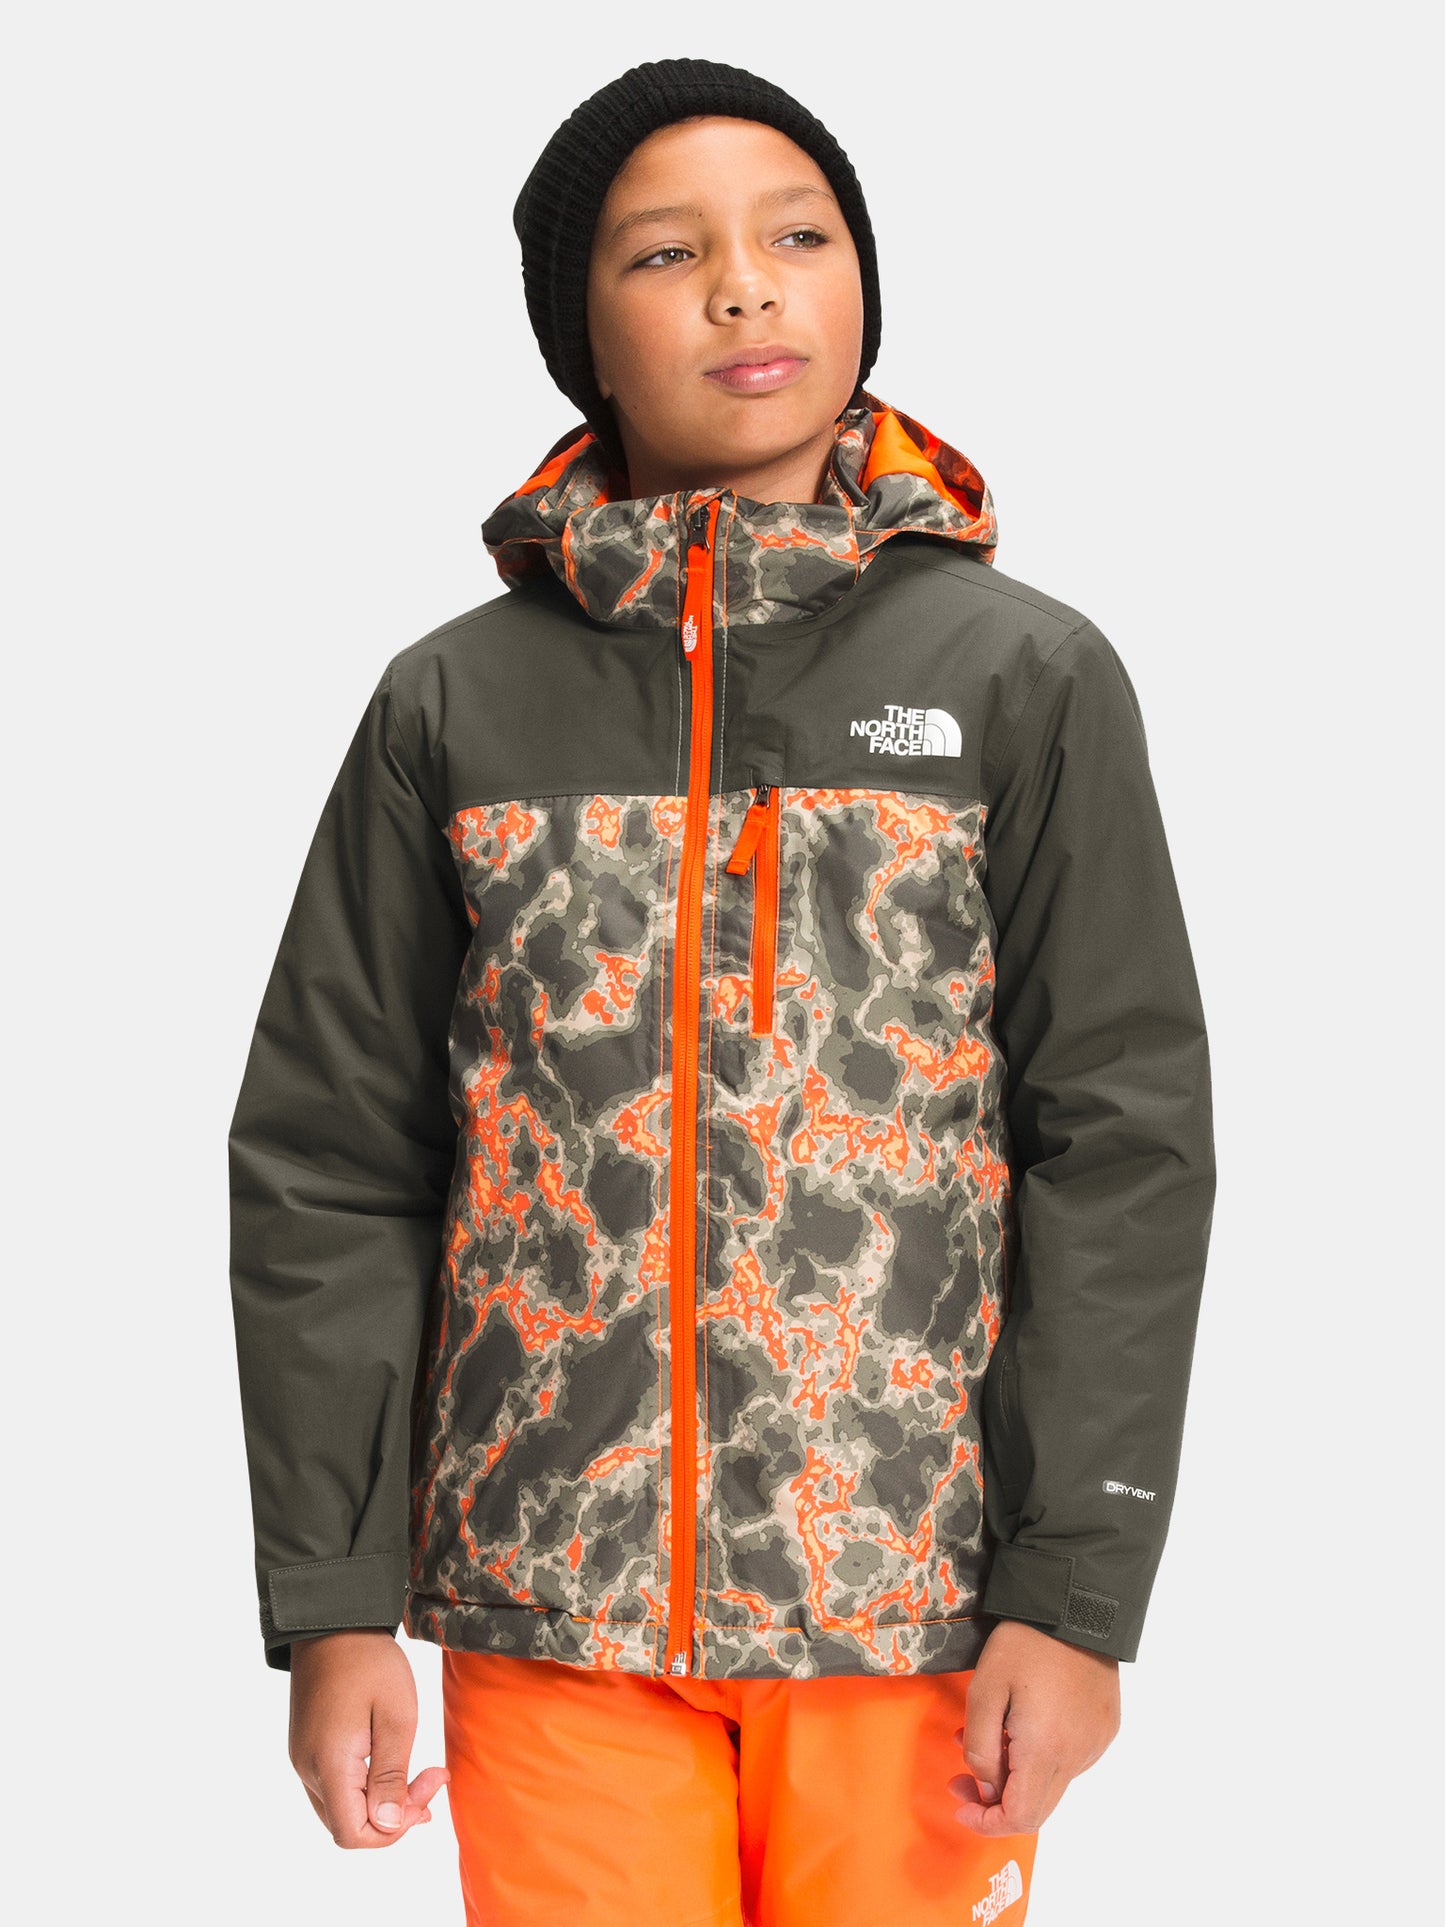 The North Face Youth Snowquest Plus Insulated Jacket